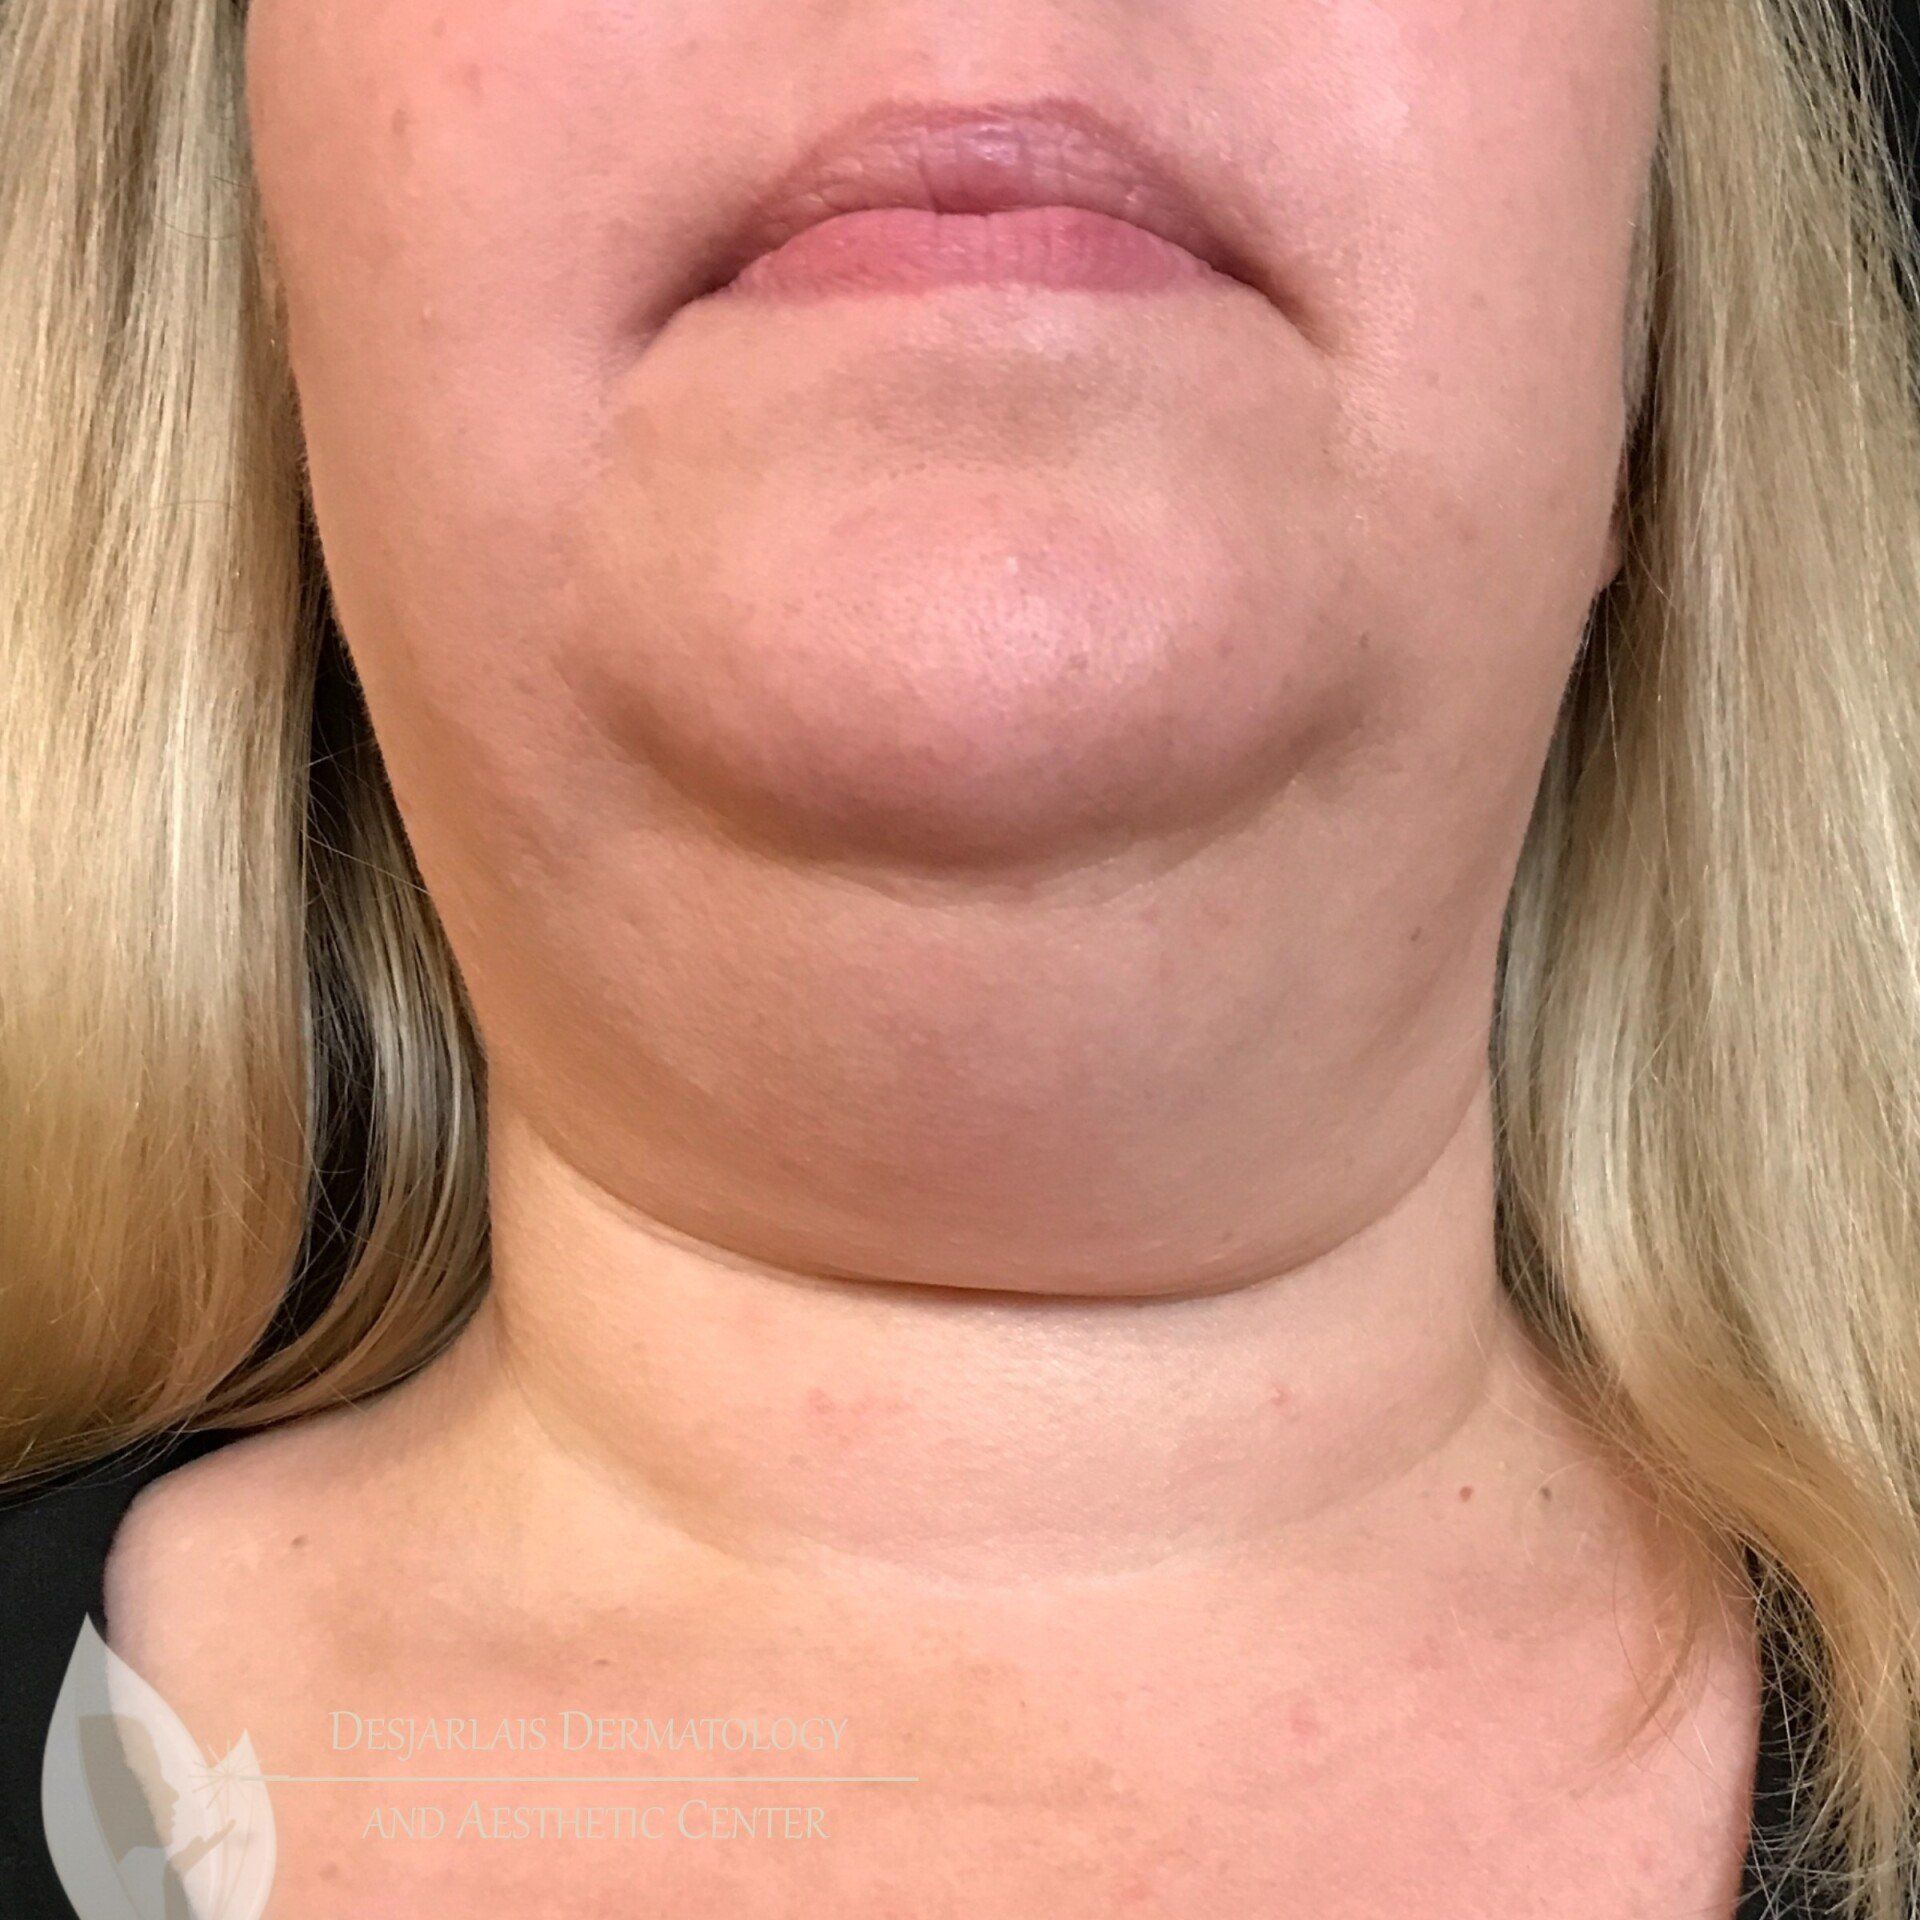 FaceTite Before Image at Dr. Desjarlais' Office in Adrian, MI